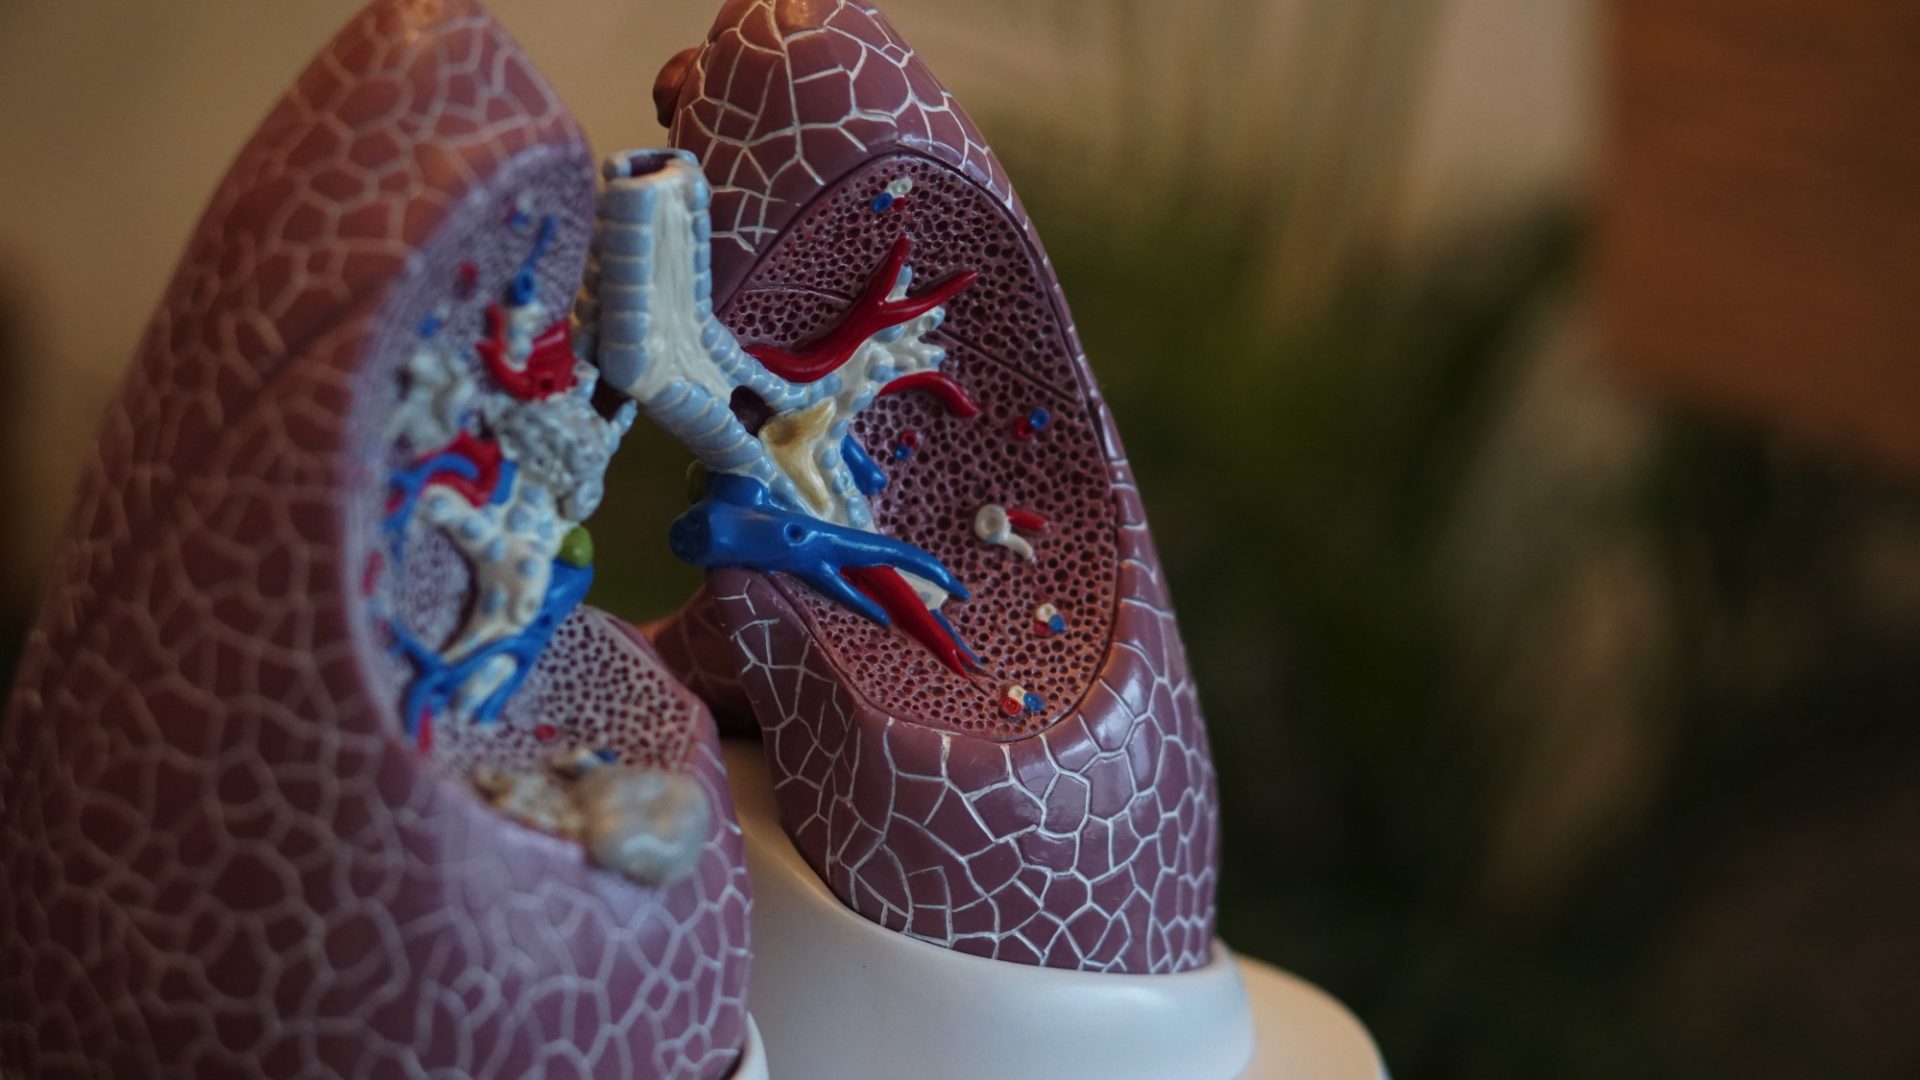 two toy lungs showing you the different veins and shapes